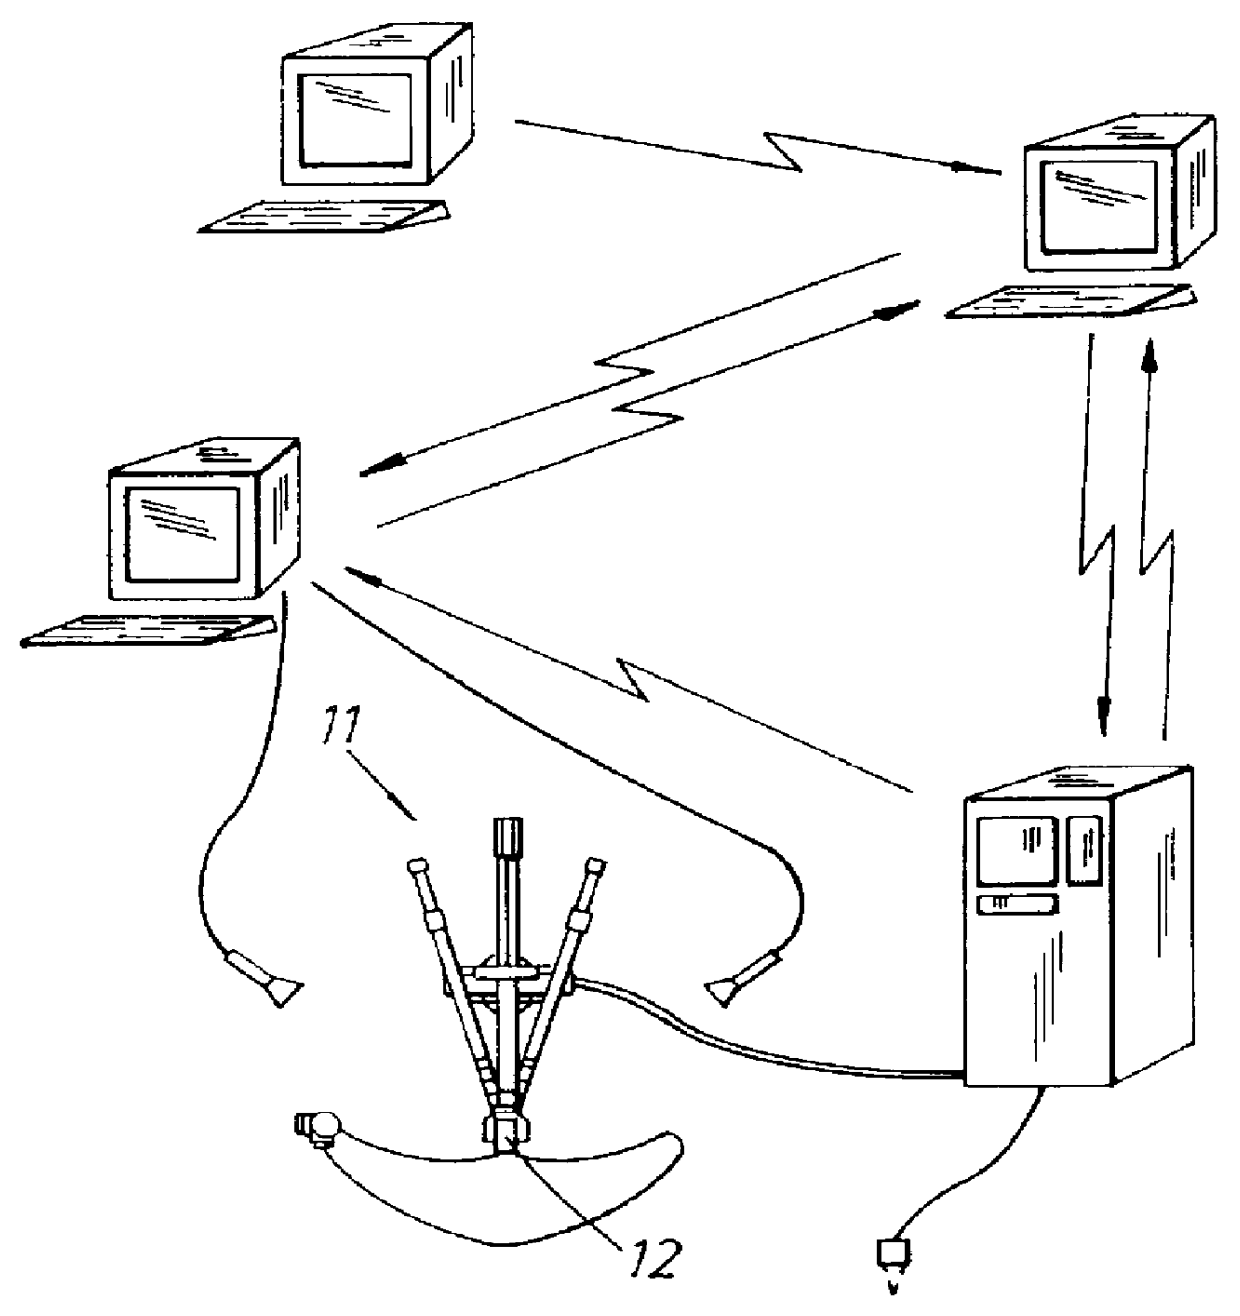 Production positioning system